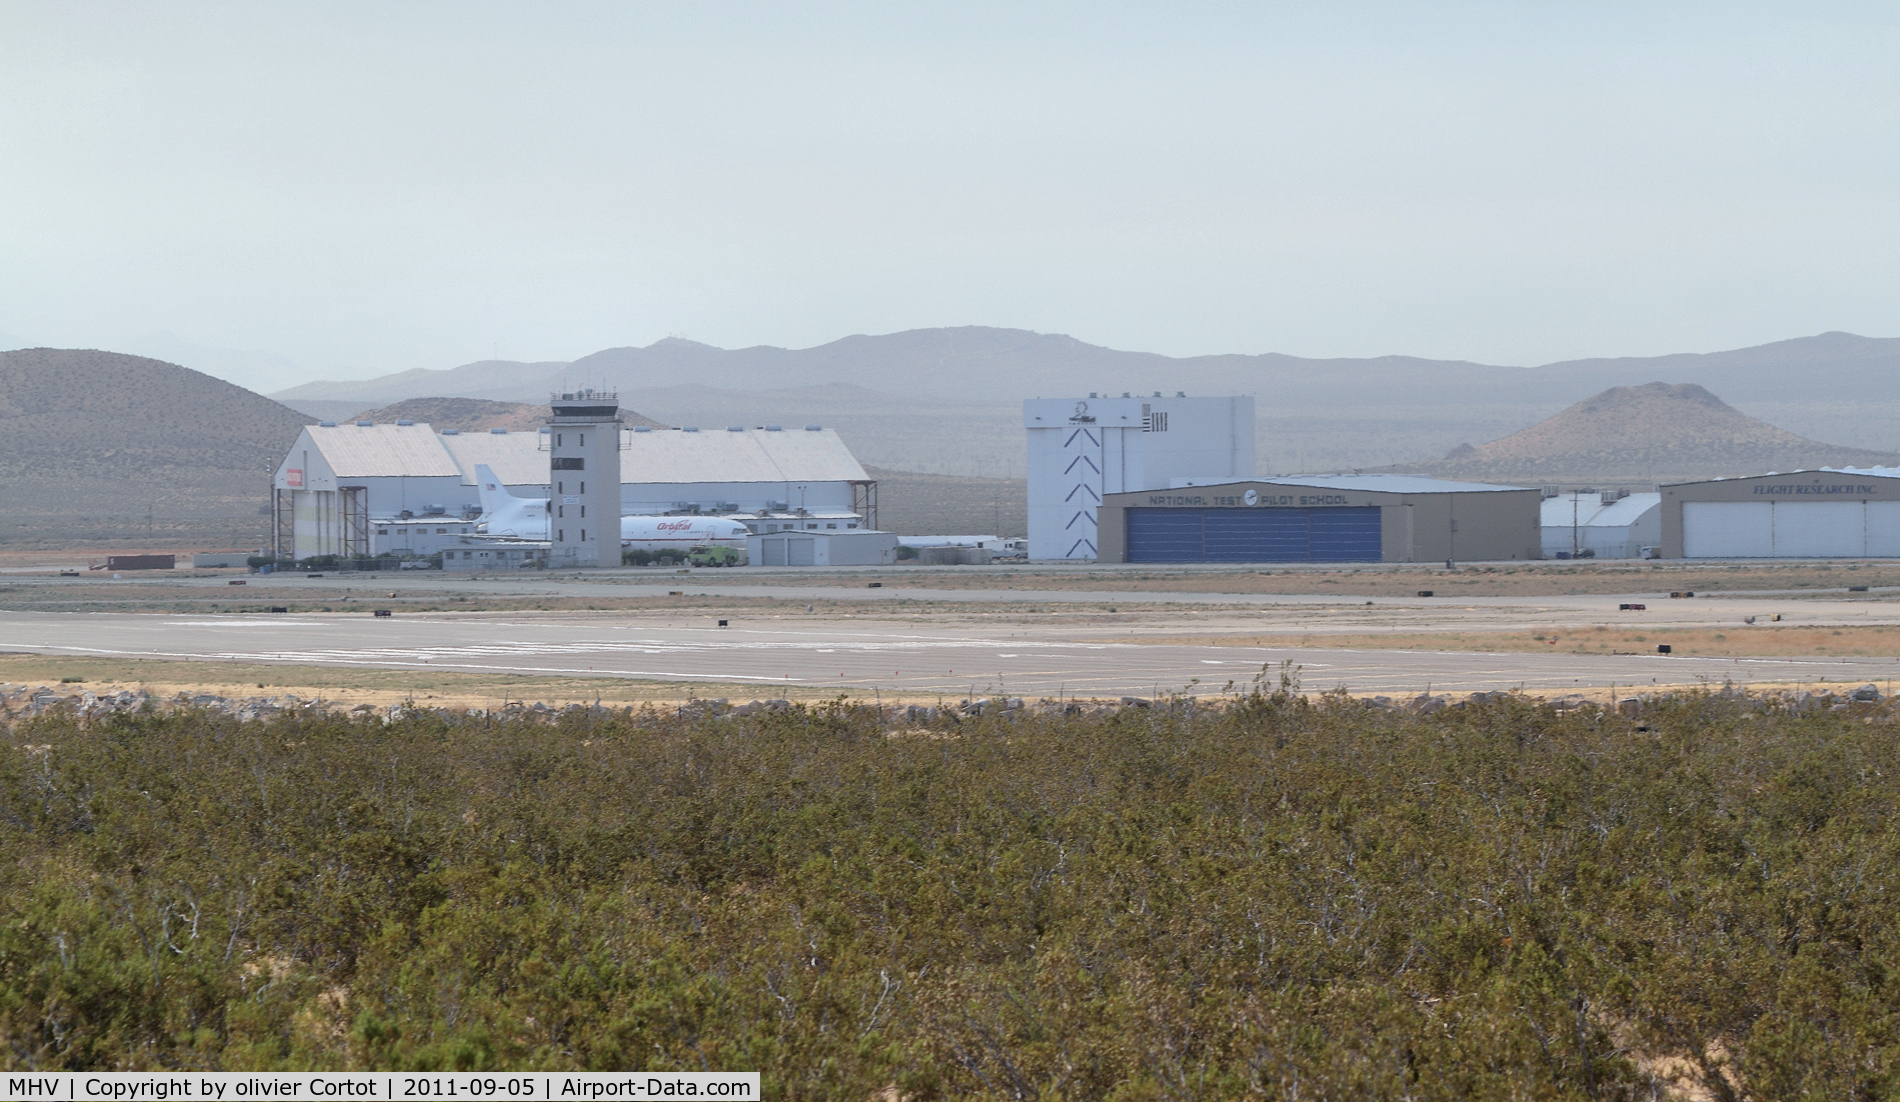 Mojave Airport (MHV) - taken from the northwest of the airport